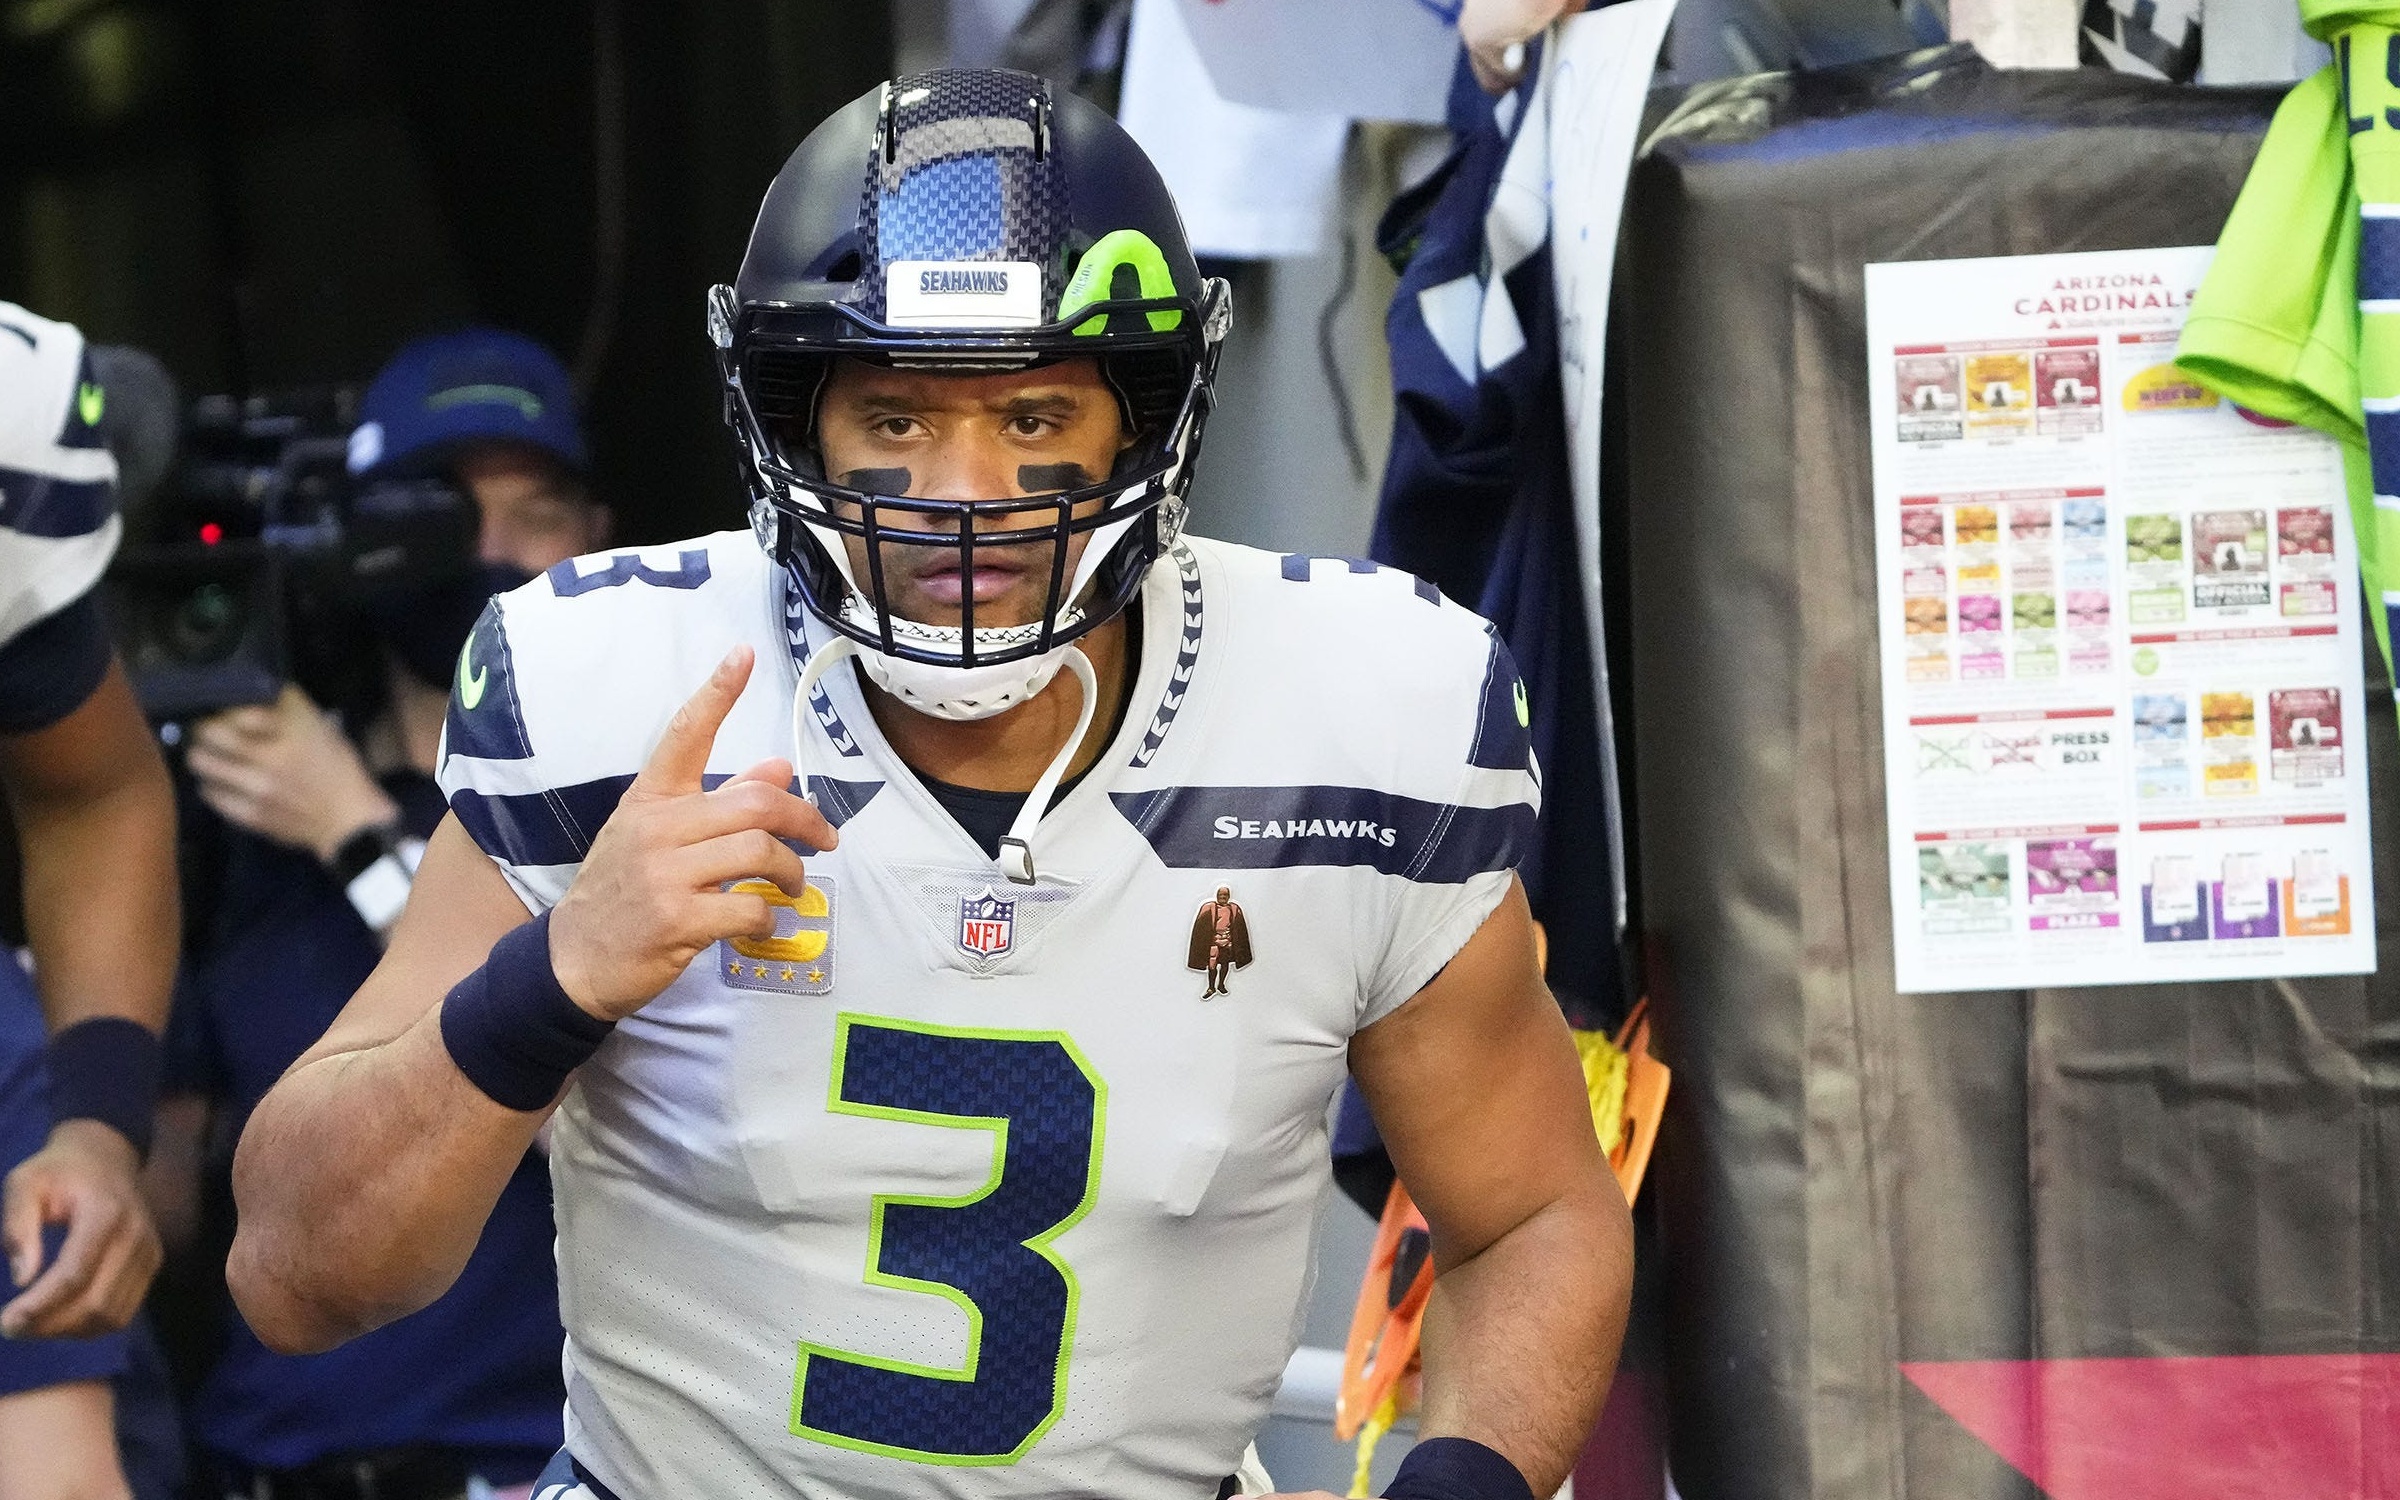 Russell Wilson runs out of the tunnel on Jan. 9. Credit: Rob Schumacher, USA TODAY Sports.